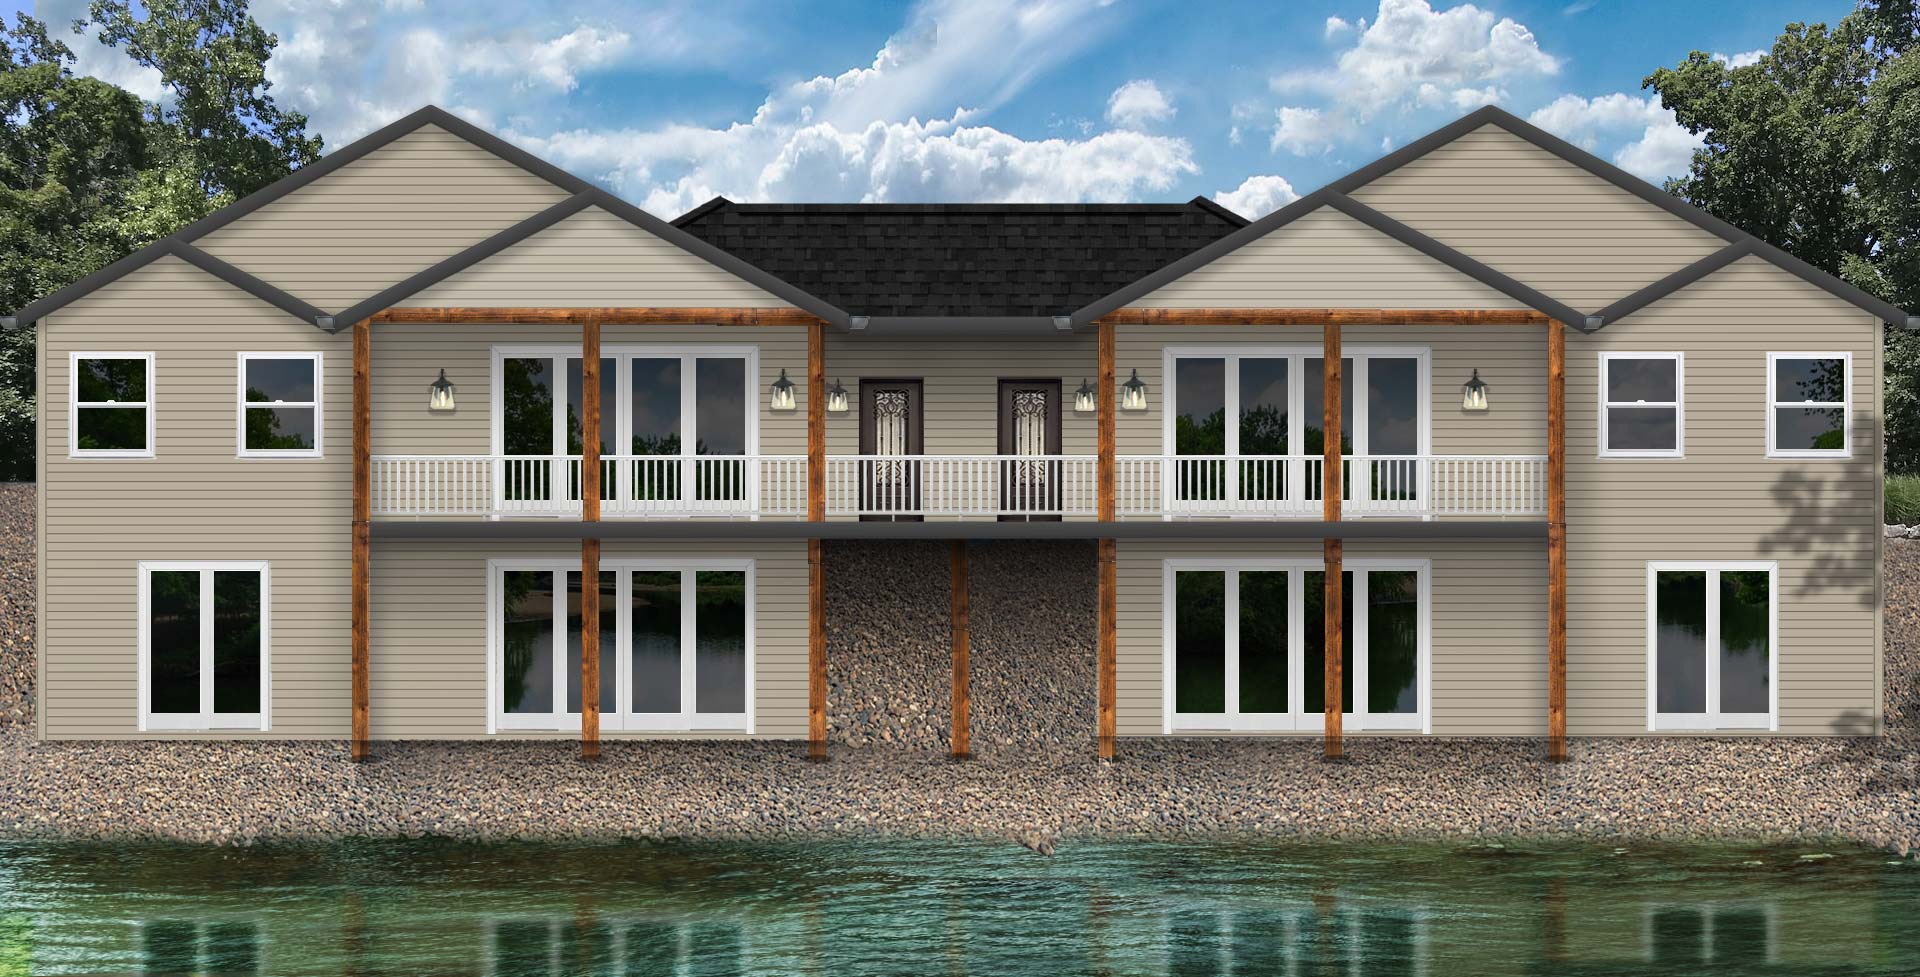 Lake house rendering from 2D elevation plan